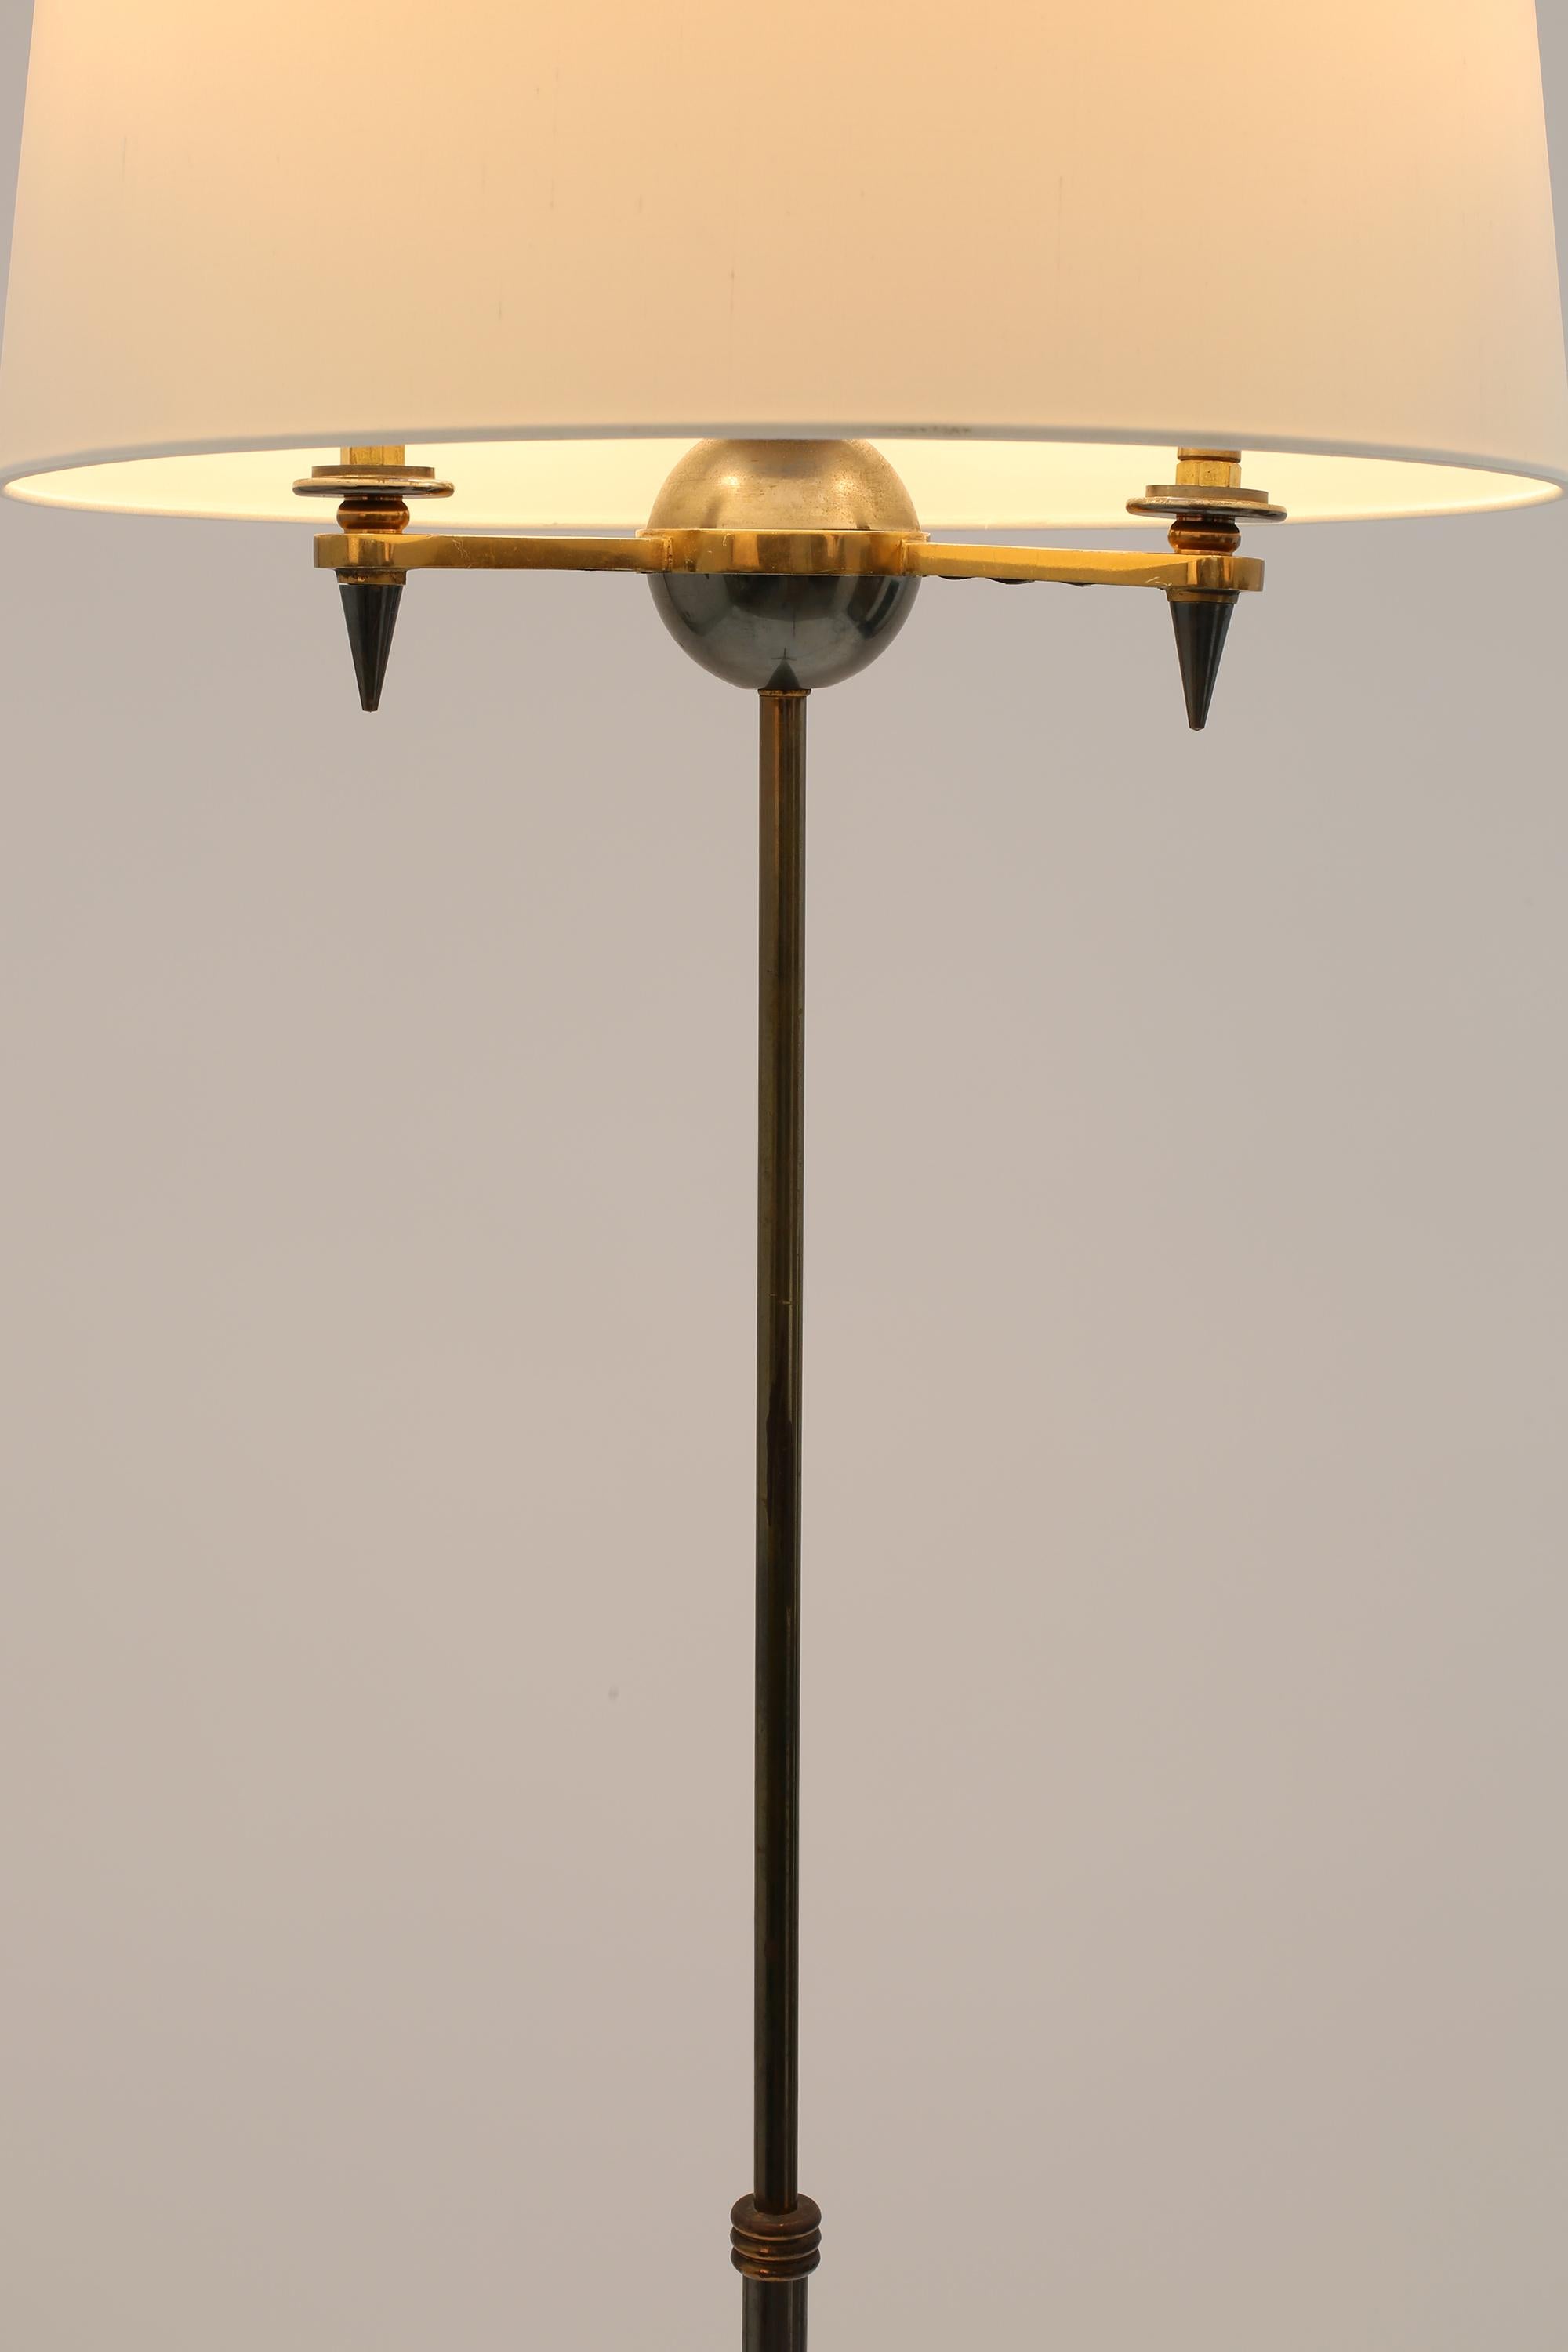 Neoclassical Floor Lamp by Henri Petitot for Atelier Petitot, French, c. 1930s In Good Condition For Sale In London, GB